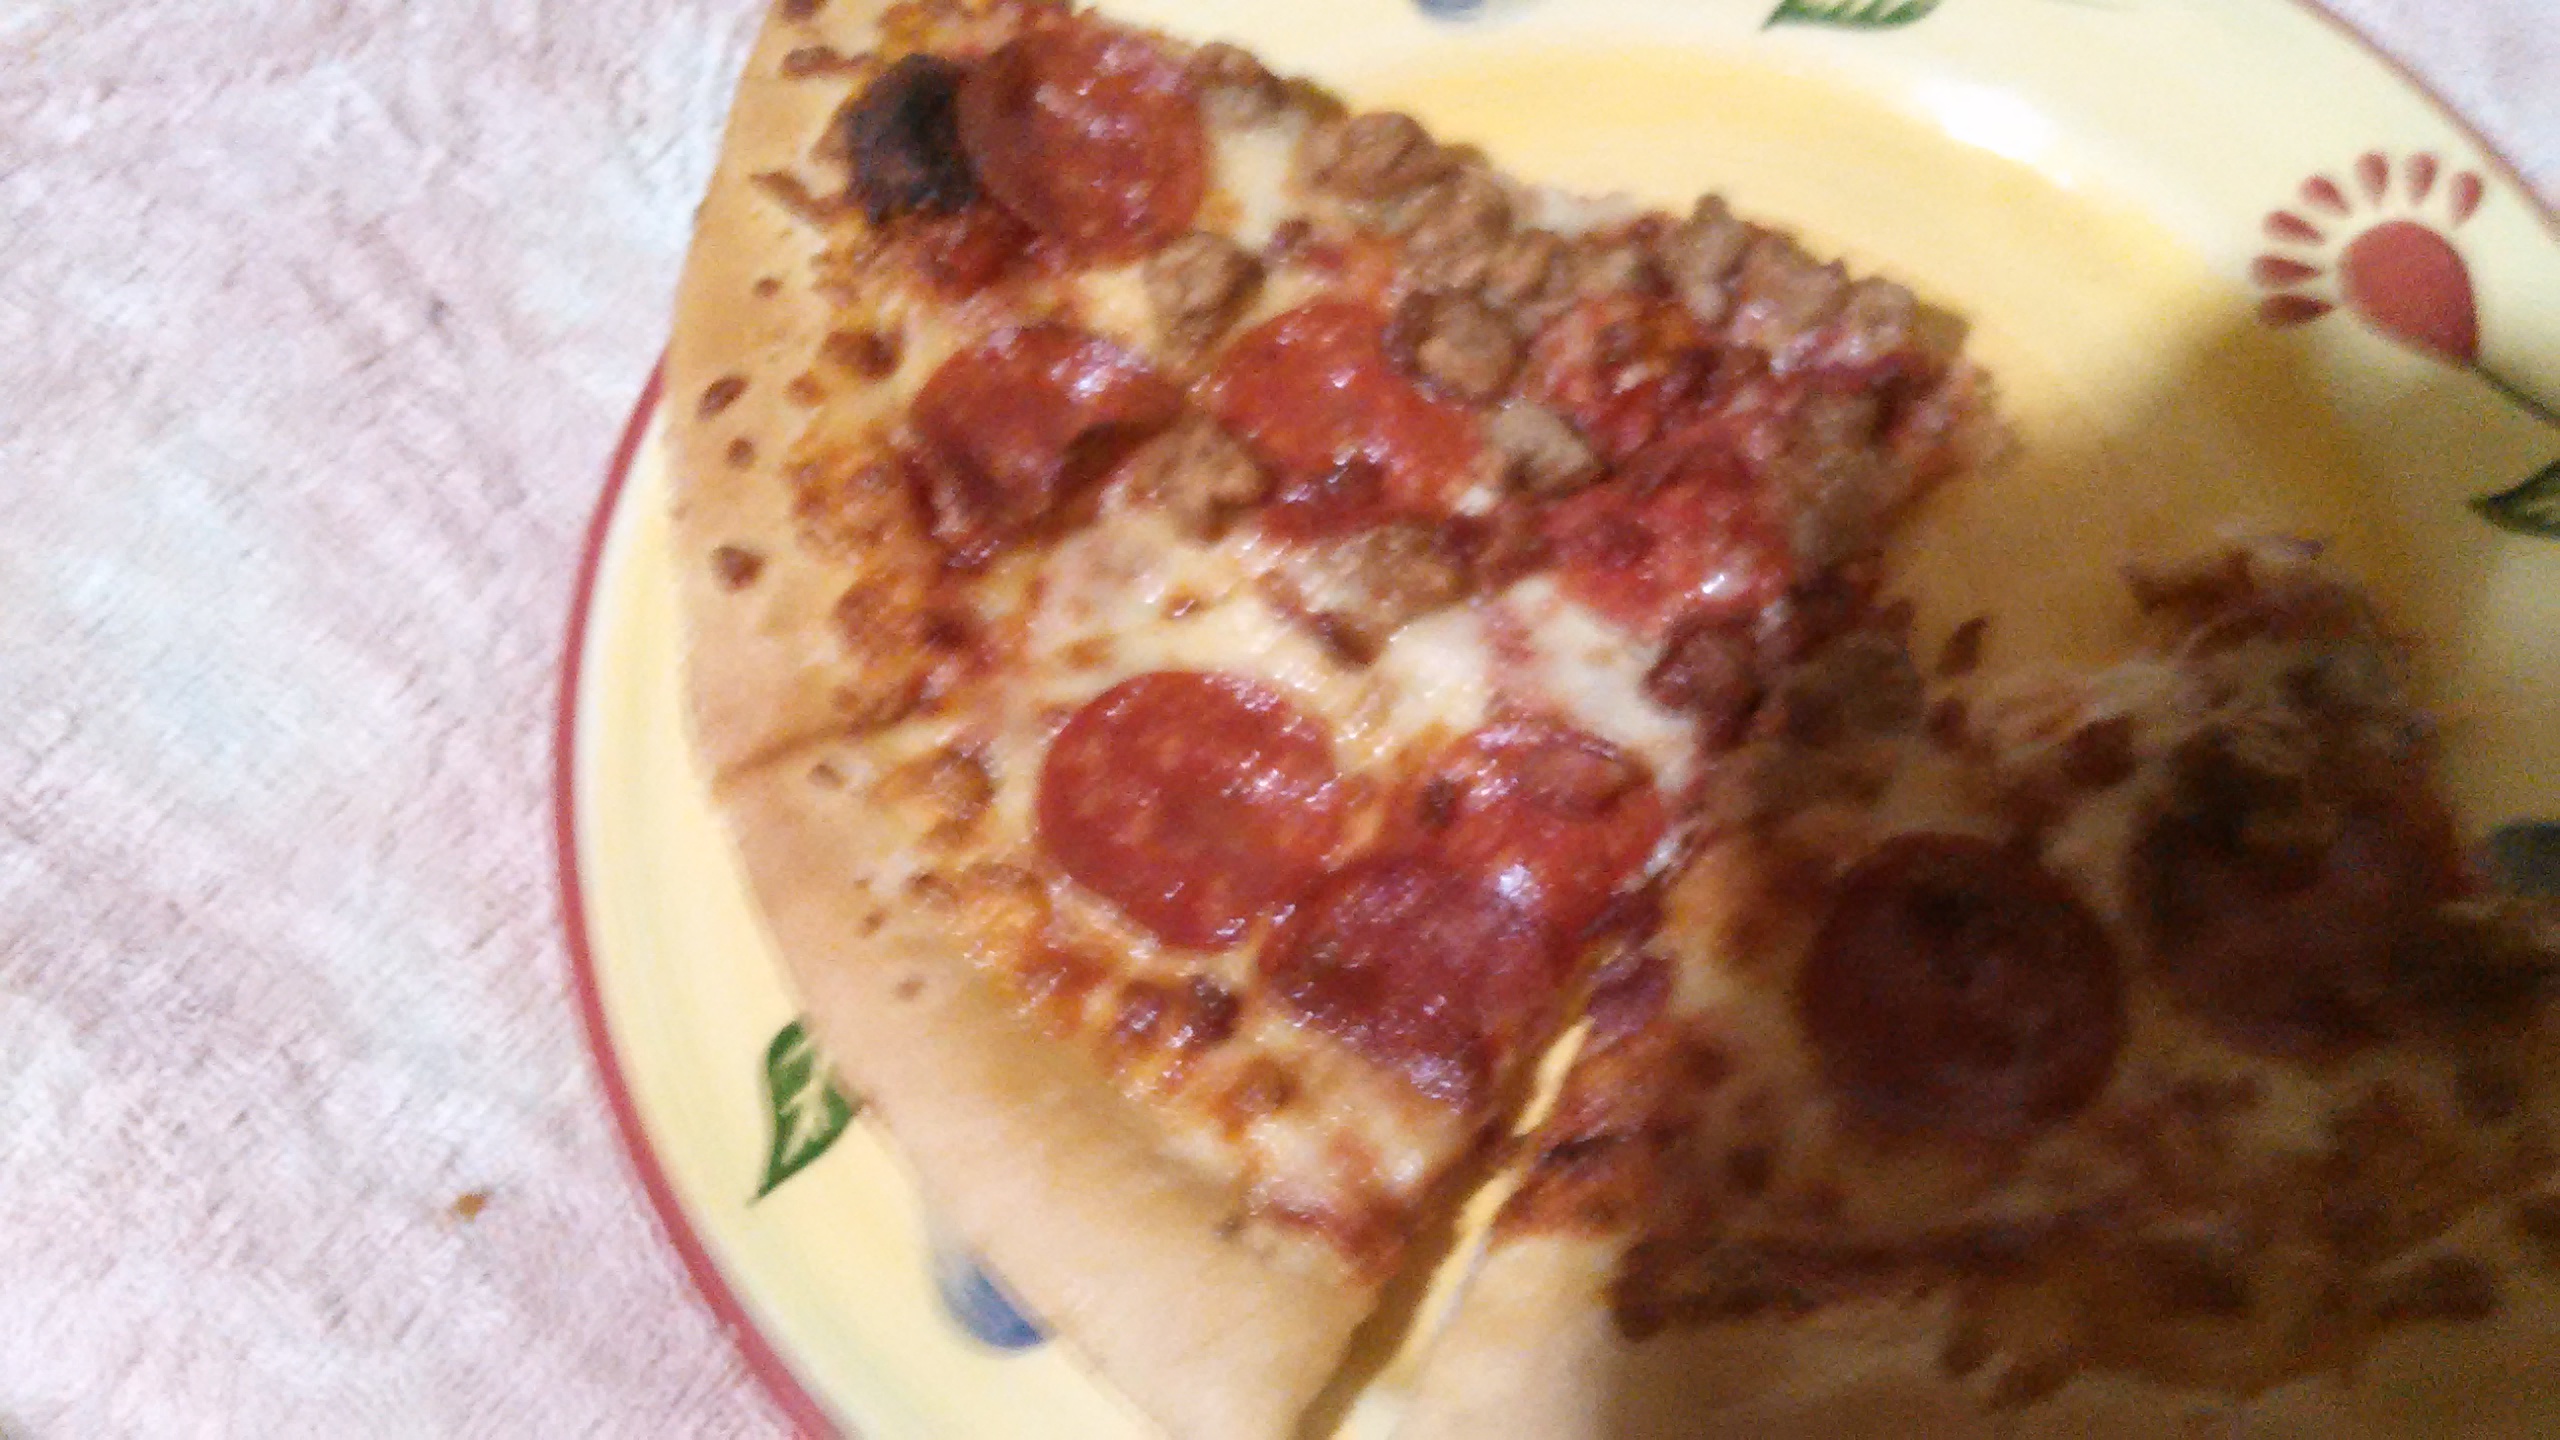 That Is Not a 5 Meat Pizza